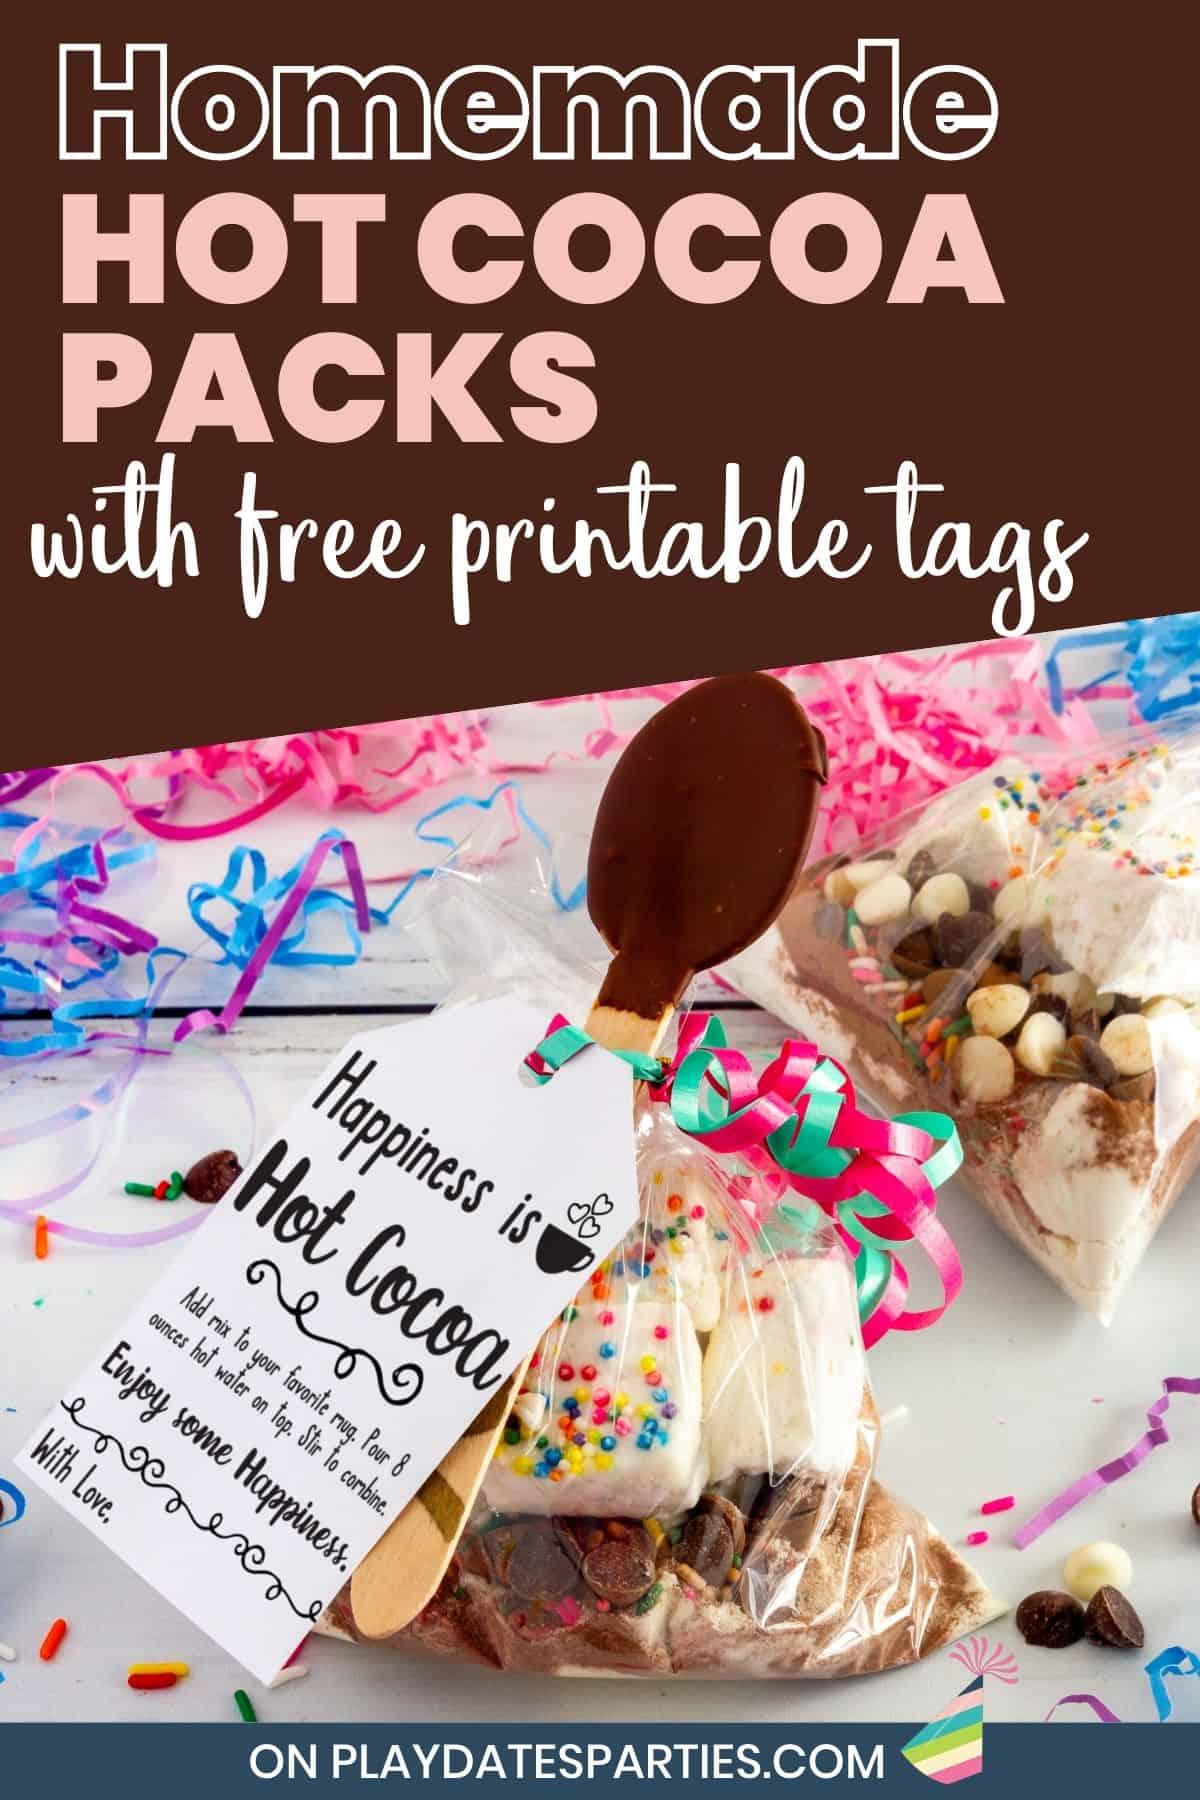 Homemade Hot Cocoa gift packs with free printable tags.